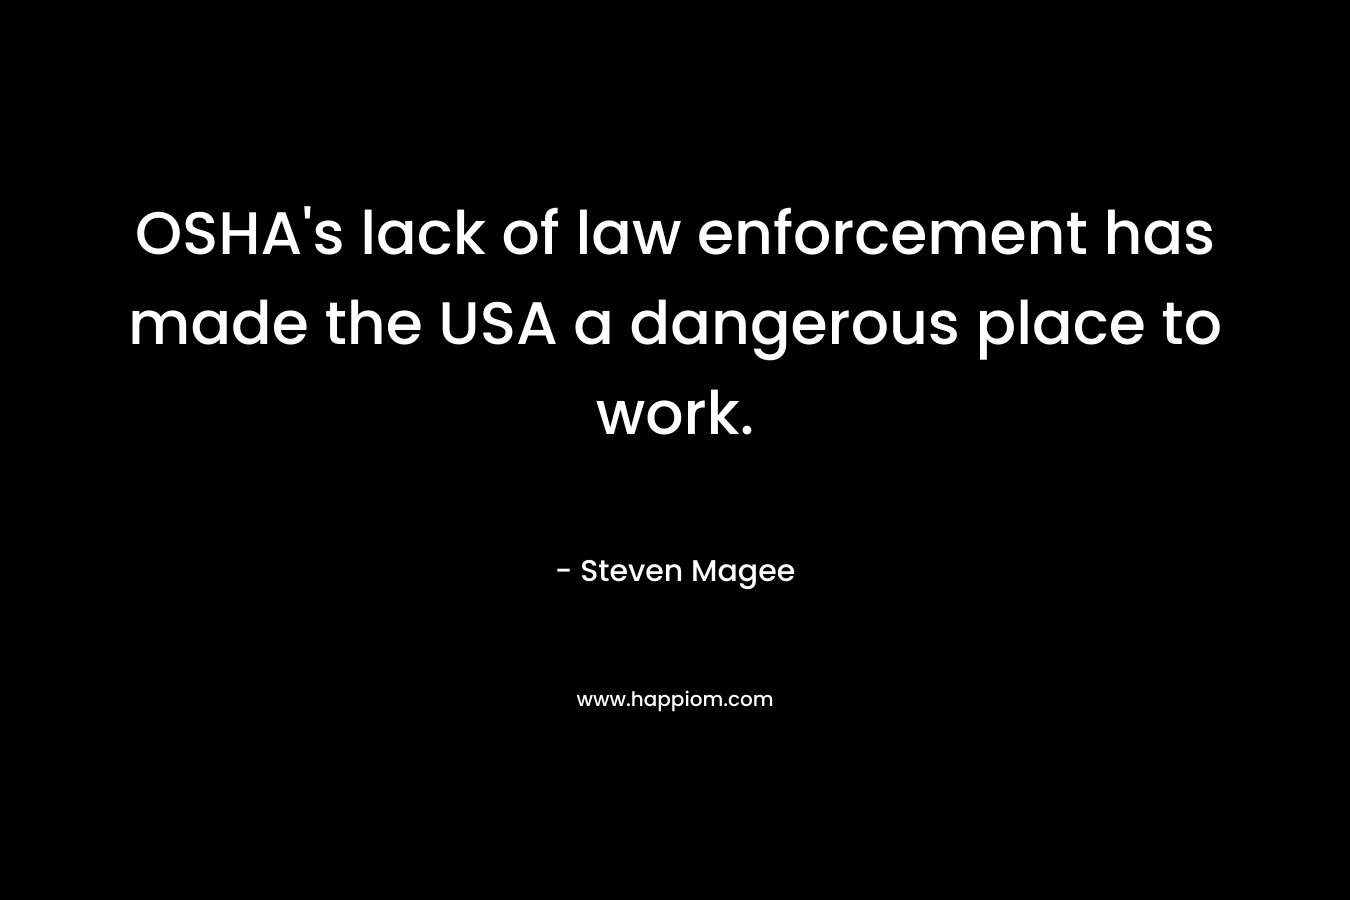 OSHA's lack of law enforcement has made the USA a dangerous place to work.